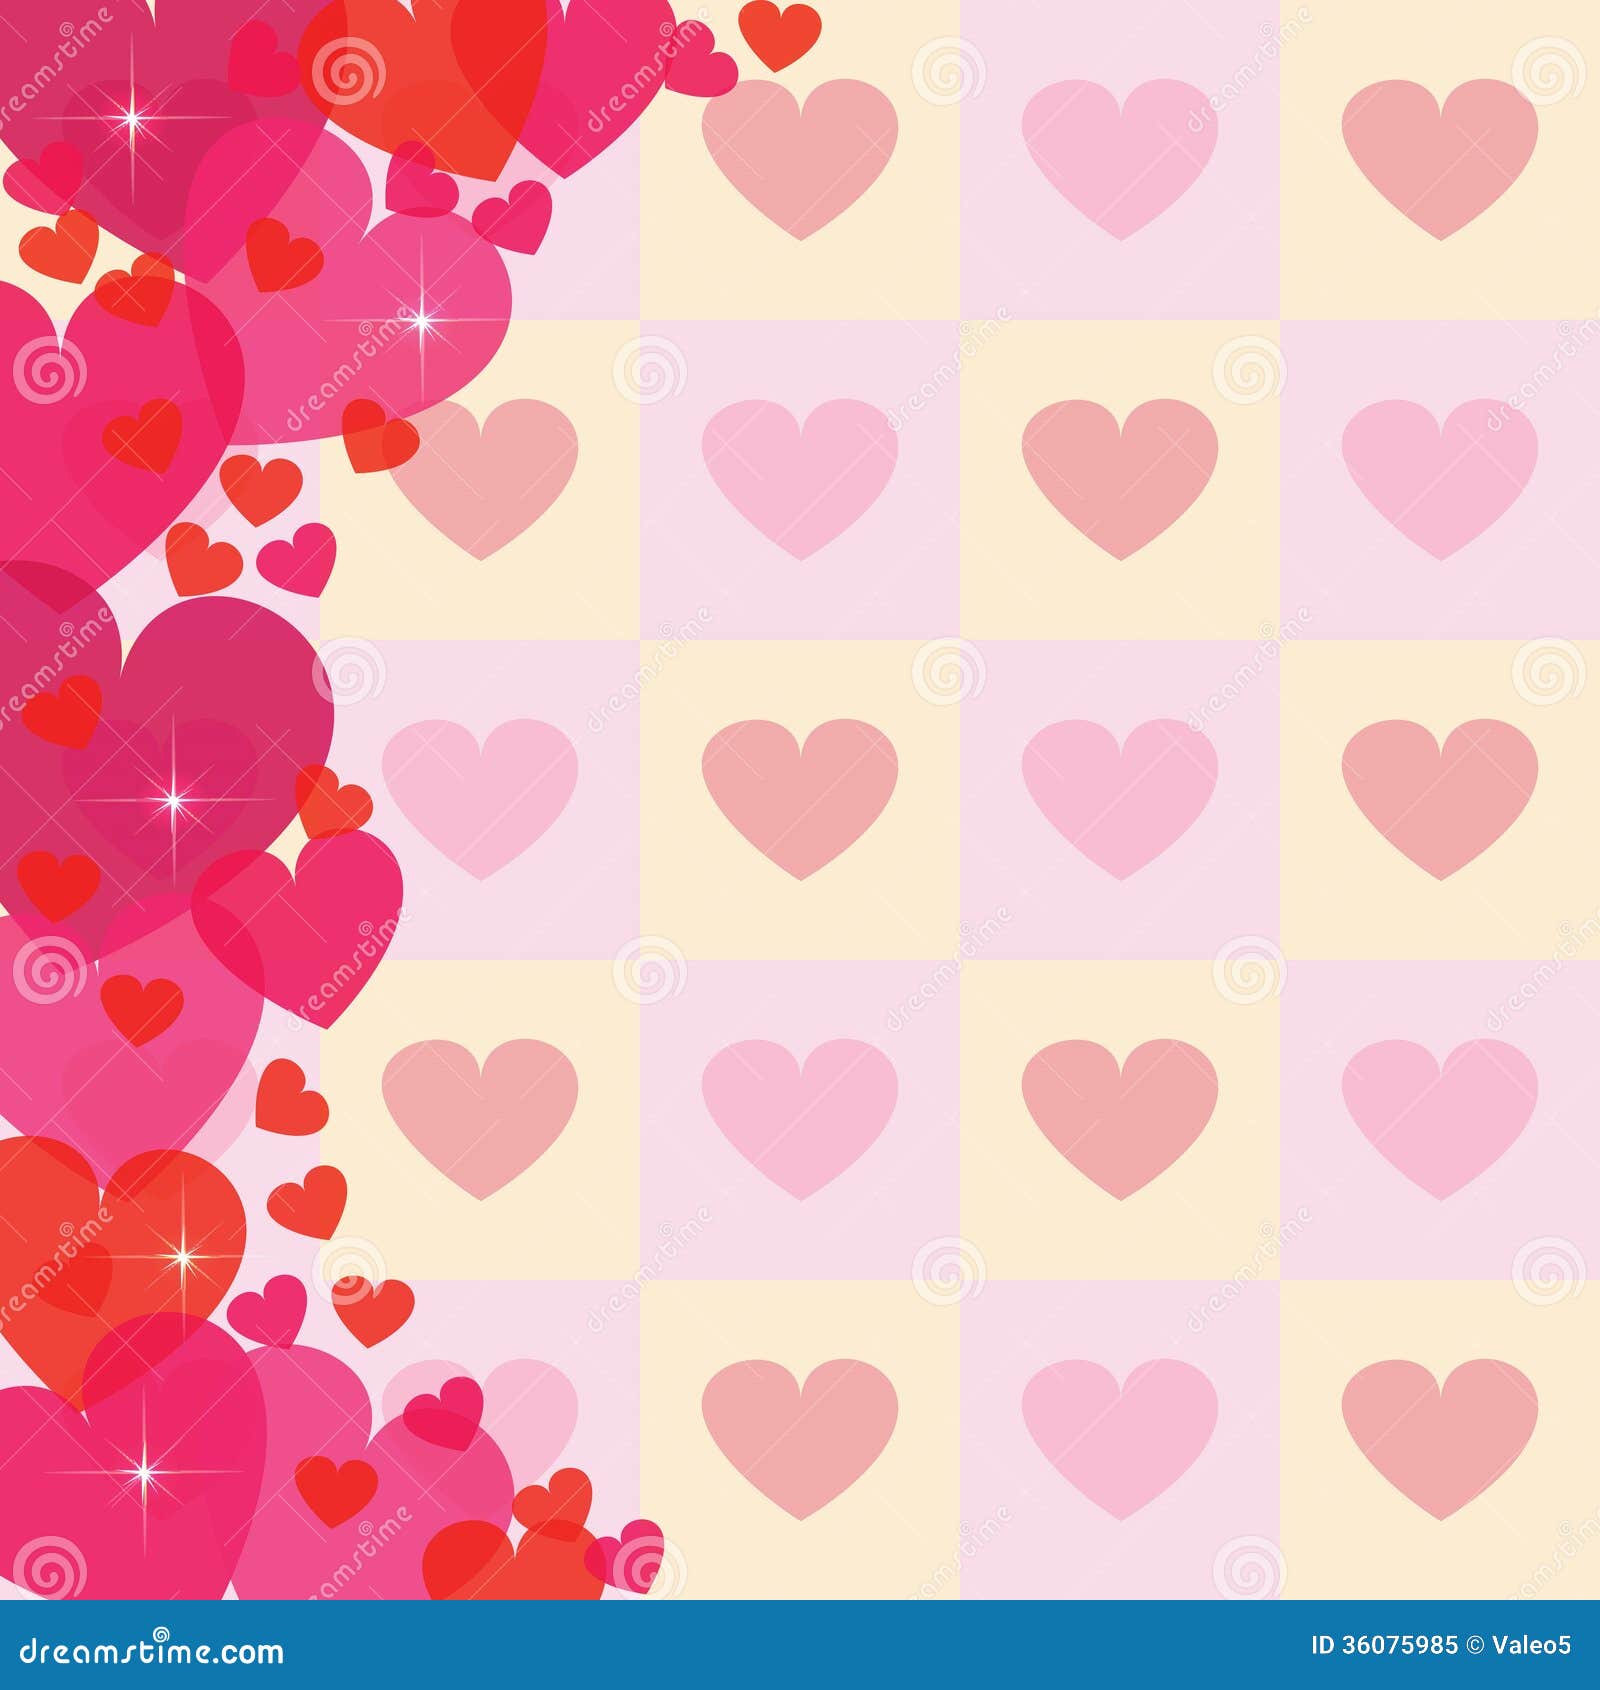 Abstract Heart Background Royalty Free Stock Photo - Image: 360759851300 x 1390